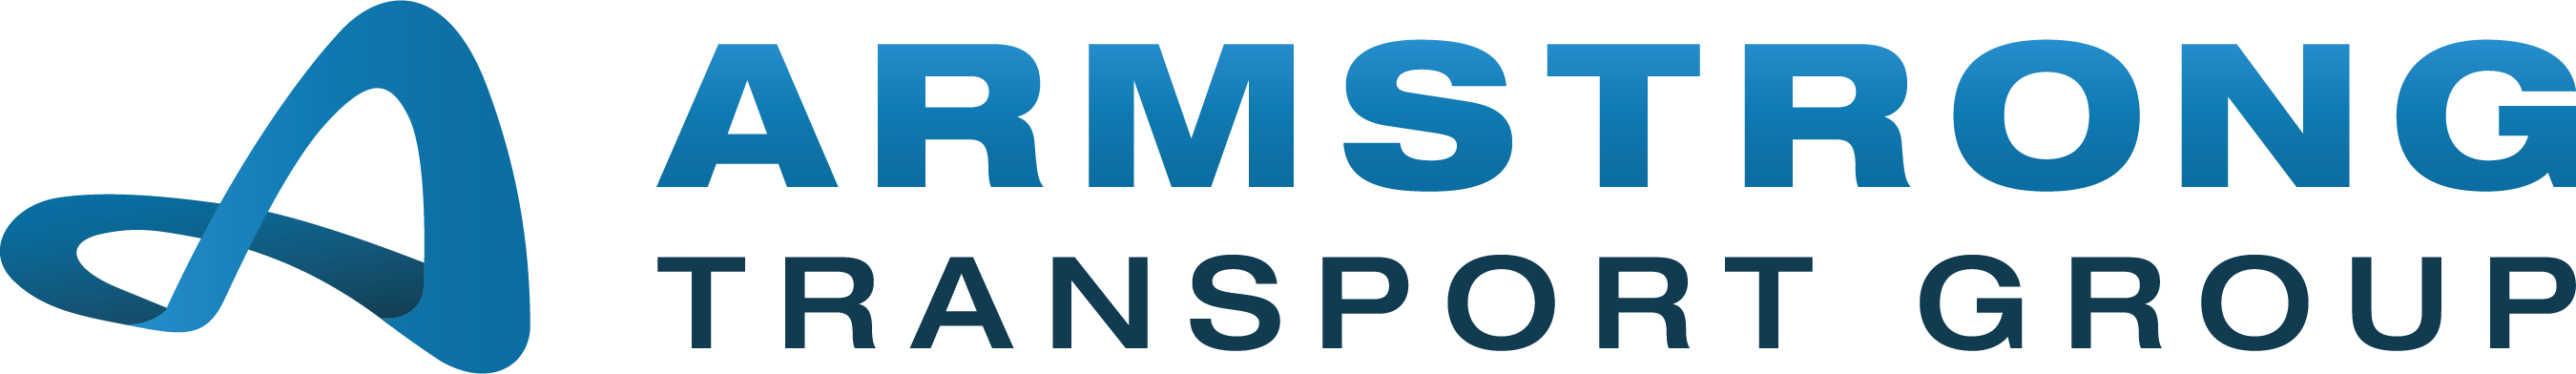 Armstrong Transport Group Company Logo